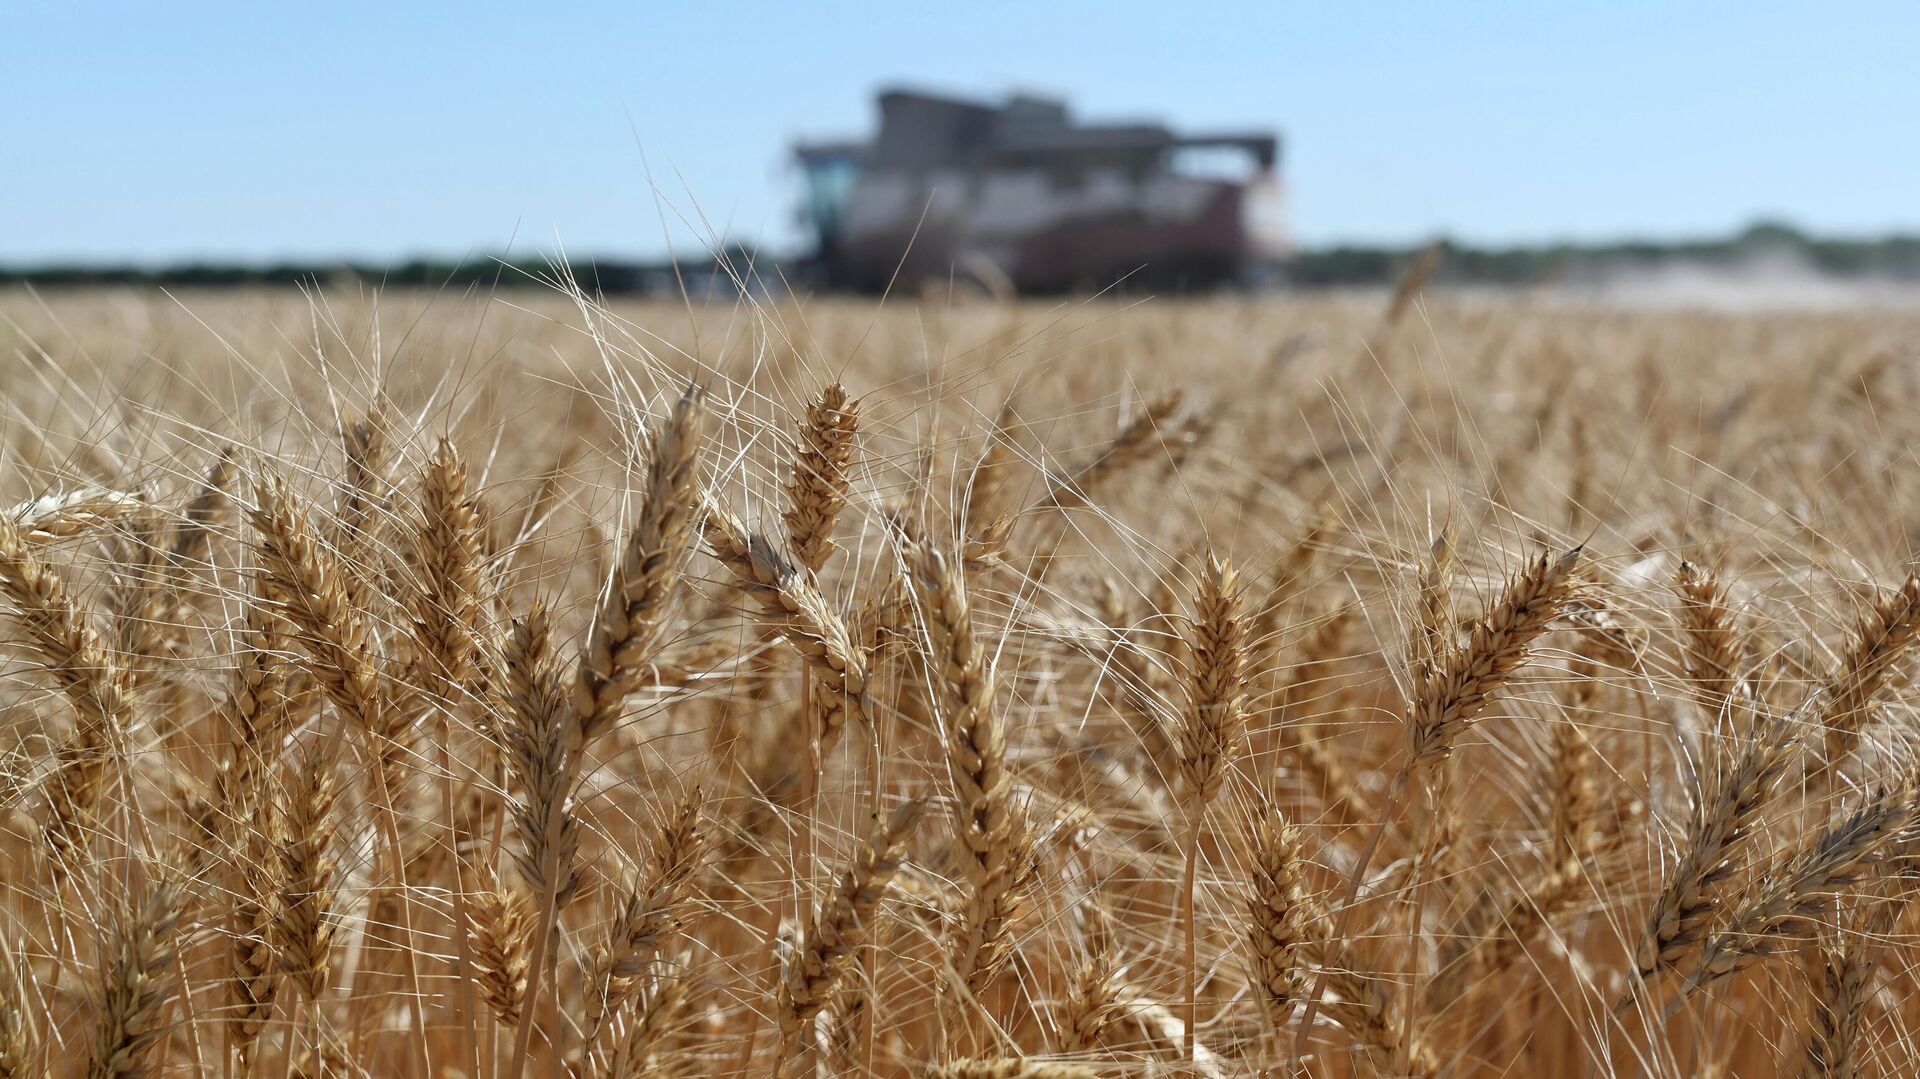 A harvester collects wheat in Semikarakorsky District of Rostov-on-Don region near Semikarakorsk, Southern Russia, Wednesday, July 6, 2022. Russia is the world's biggest exporter of wheat, accounting for almost a fifth of global shipments. Agriculture is among the most important industries in Russia, accounting for around 4% of its GDP, according to the World Bank. (AP Photo) - Sputnik Africa, 1920, 24.05.2023